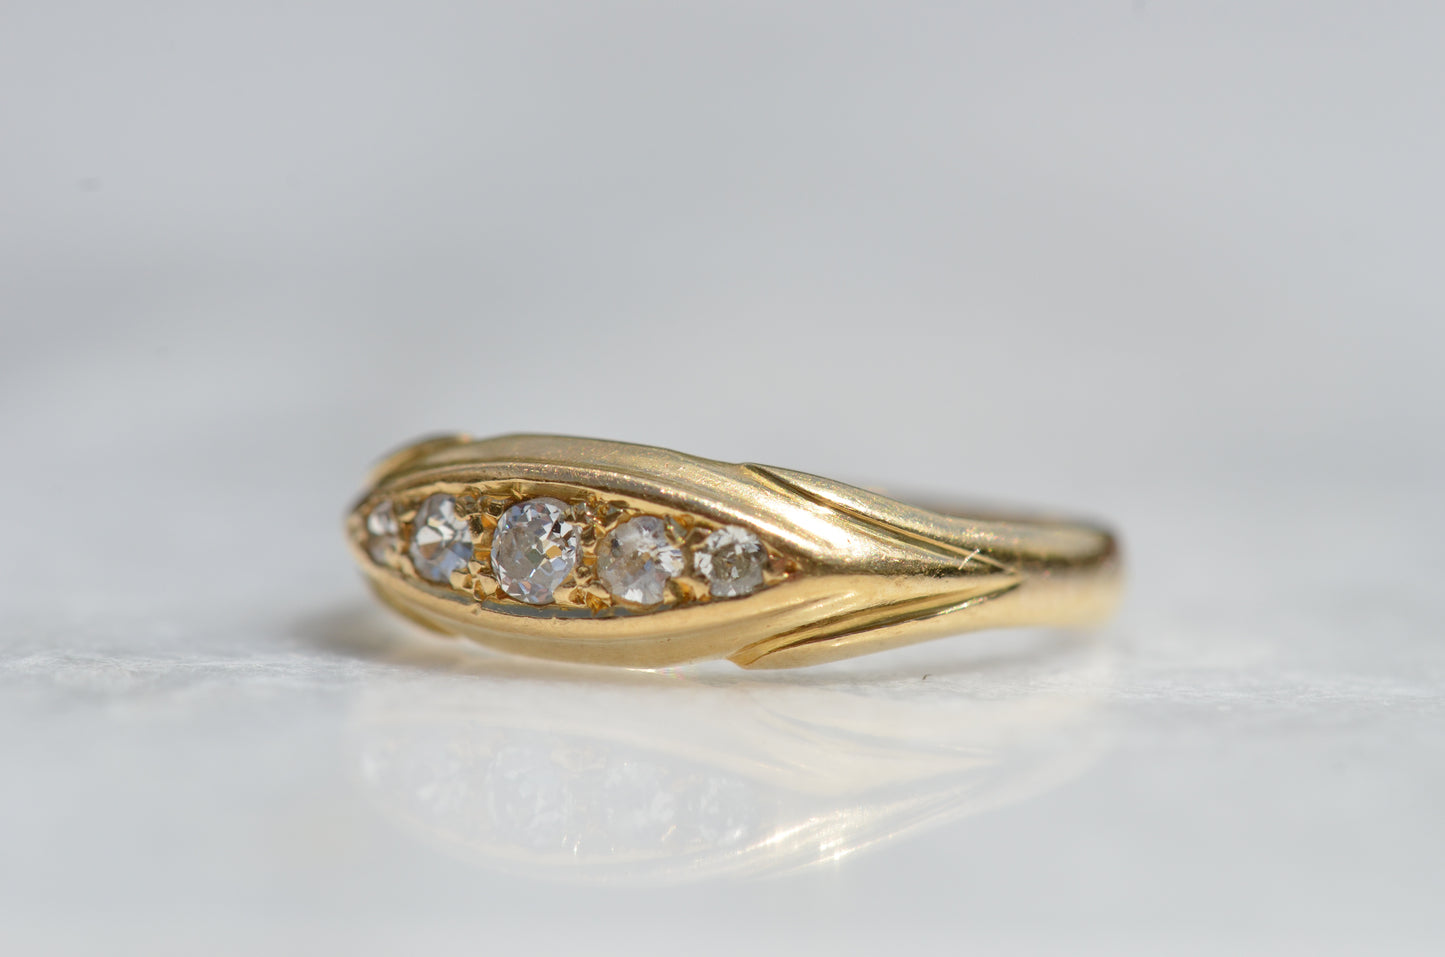 Sweet Antique Boat Ring